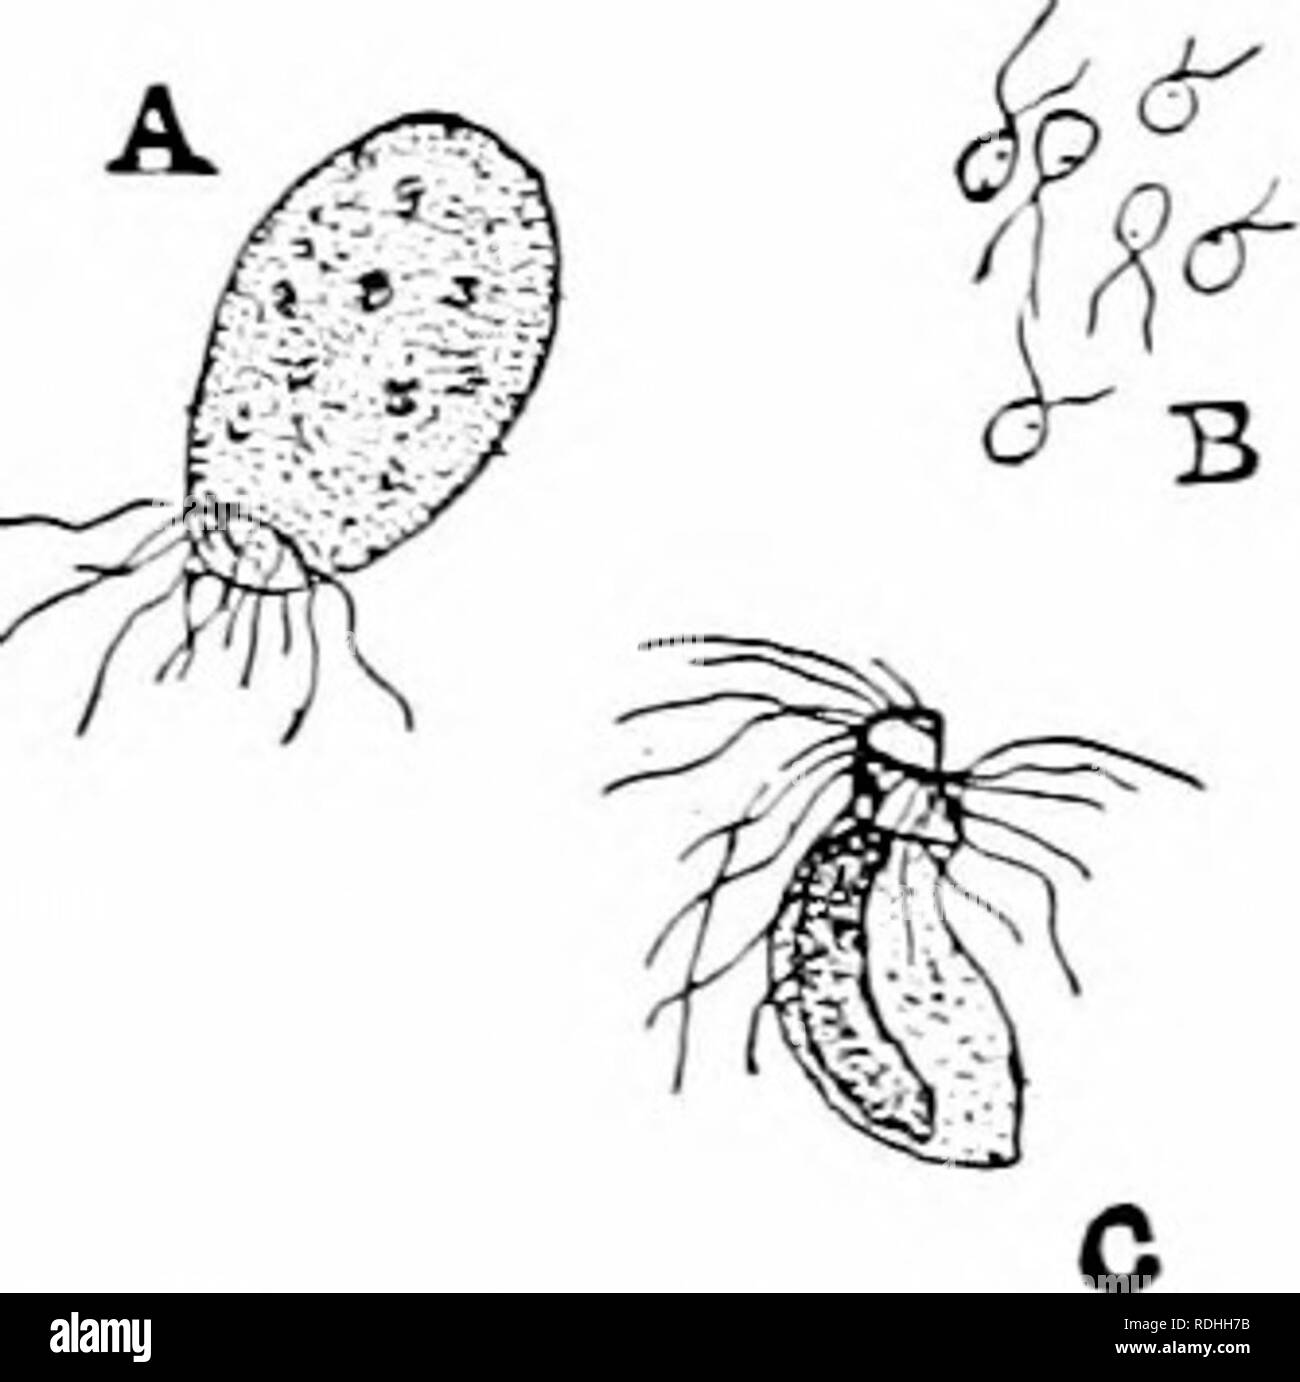 . Plant studies; an elementary botany. Botany. of the moss-iil;ints is still more true of the fern-plants; while among tlie seed-])lants certain spores {pol- len grains) are conspiieuous (see Fig. ll(J), bnt the eggs can be ob- served only by special manipulation in the laboratory. Seeds are neither sjiorcs nor eggs, but ])eculiar repro- ductive bodies Avhich the hidden egg has helped to produce. 73. Germination. — Spores and eggs are expected to germinate ; that is, to begin the development of a ]iew ])lant. This germination needs certain external conditions, prominent among which are defi- n Stock Photo